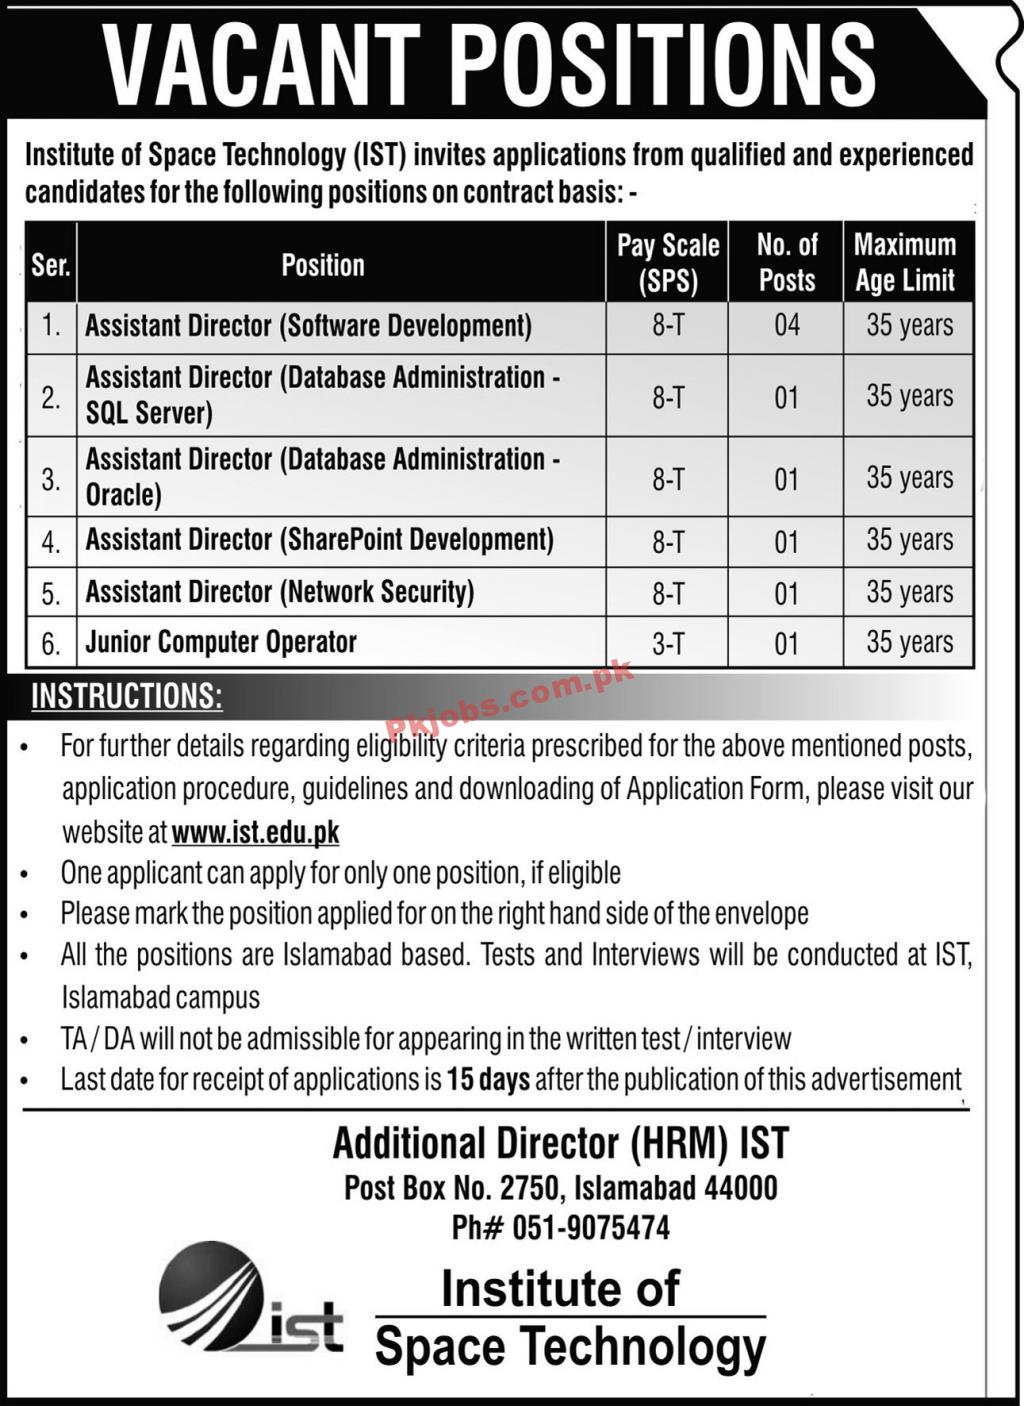 Institute of Space Technology (IST) Latest Management PK Jobs 2021